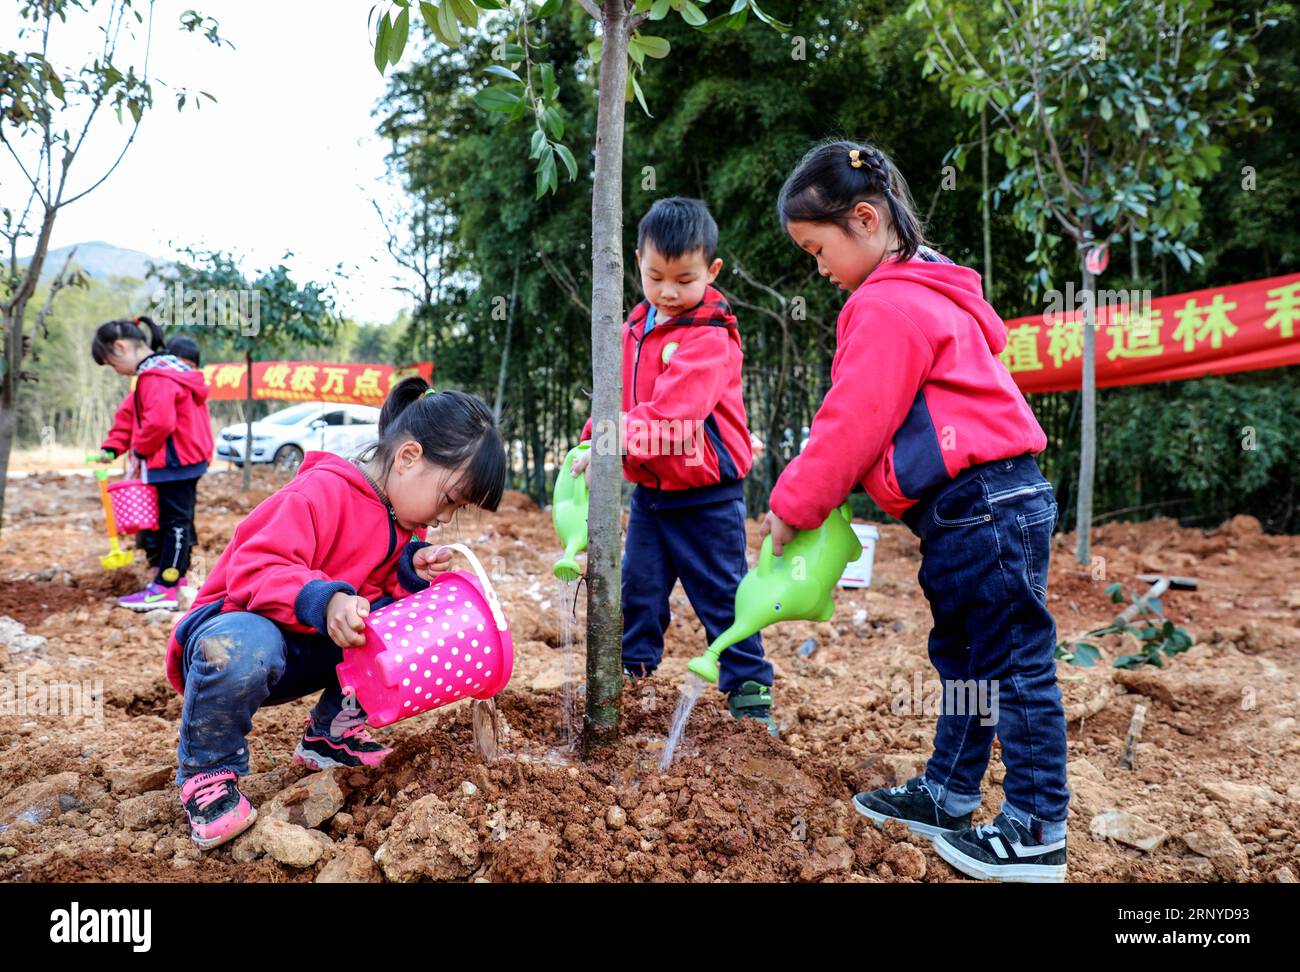 180312) -- CHANGXING, March 12, 2018 -- Children water a tree during a tree  planting activity at Lijiaxiang Township of Changxing County, east China s  Zhejiang Province, March 12, 2018. A tree